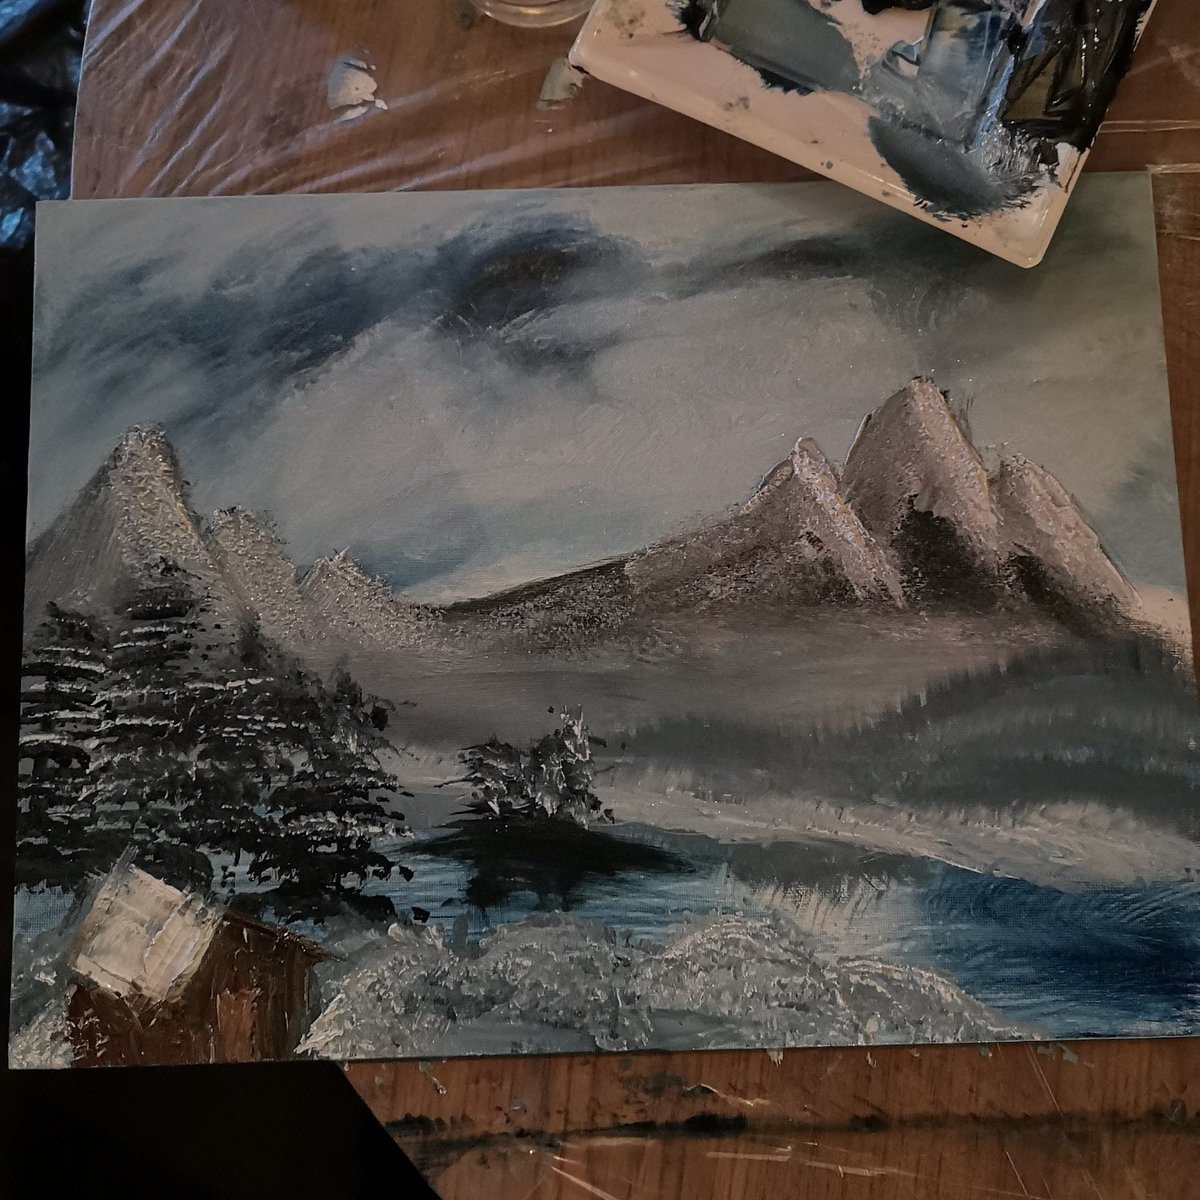 Enjoyed our Bob Ross evening tonight and I'm pretty impressed with the final product. I just kept telling myself 'no pressure' and it'll all come together in the end 🤣 🌲🏔️ #bobrosspainting #craftbeer #liverpool #smithdownroad #painting #craftnight #mountains #trees #logcabin